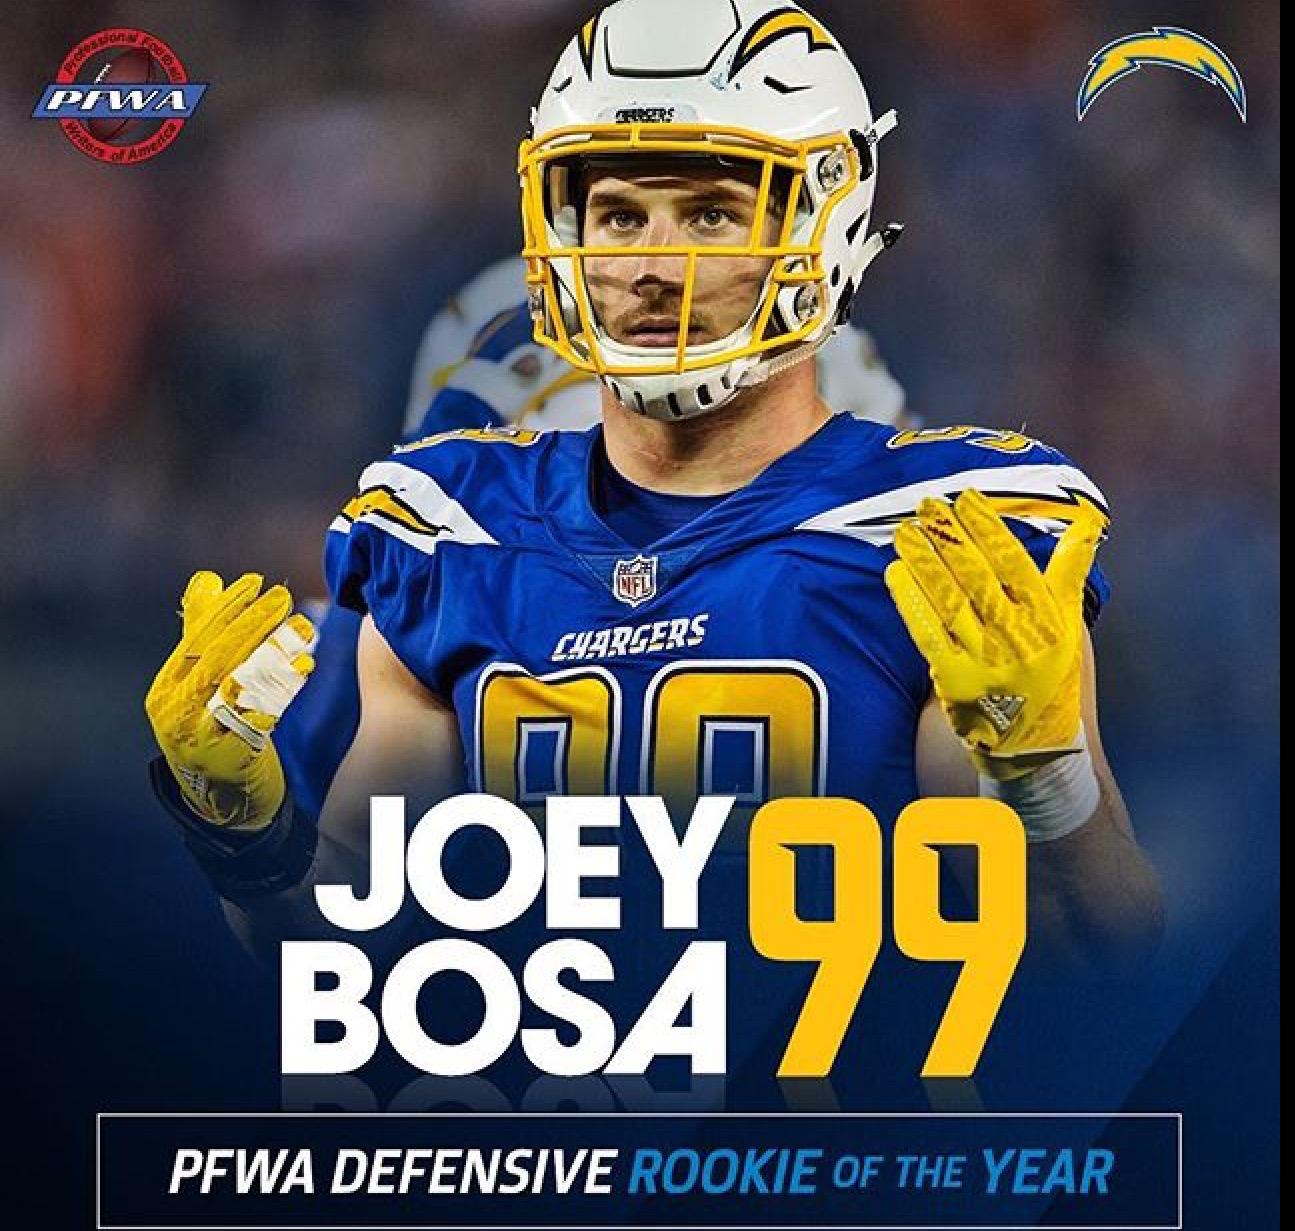 Joey Bosa 99 Los Angeles Chargers! ⚡. Football